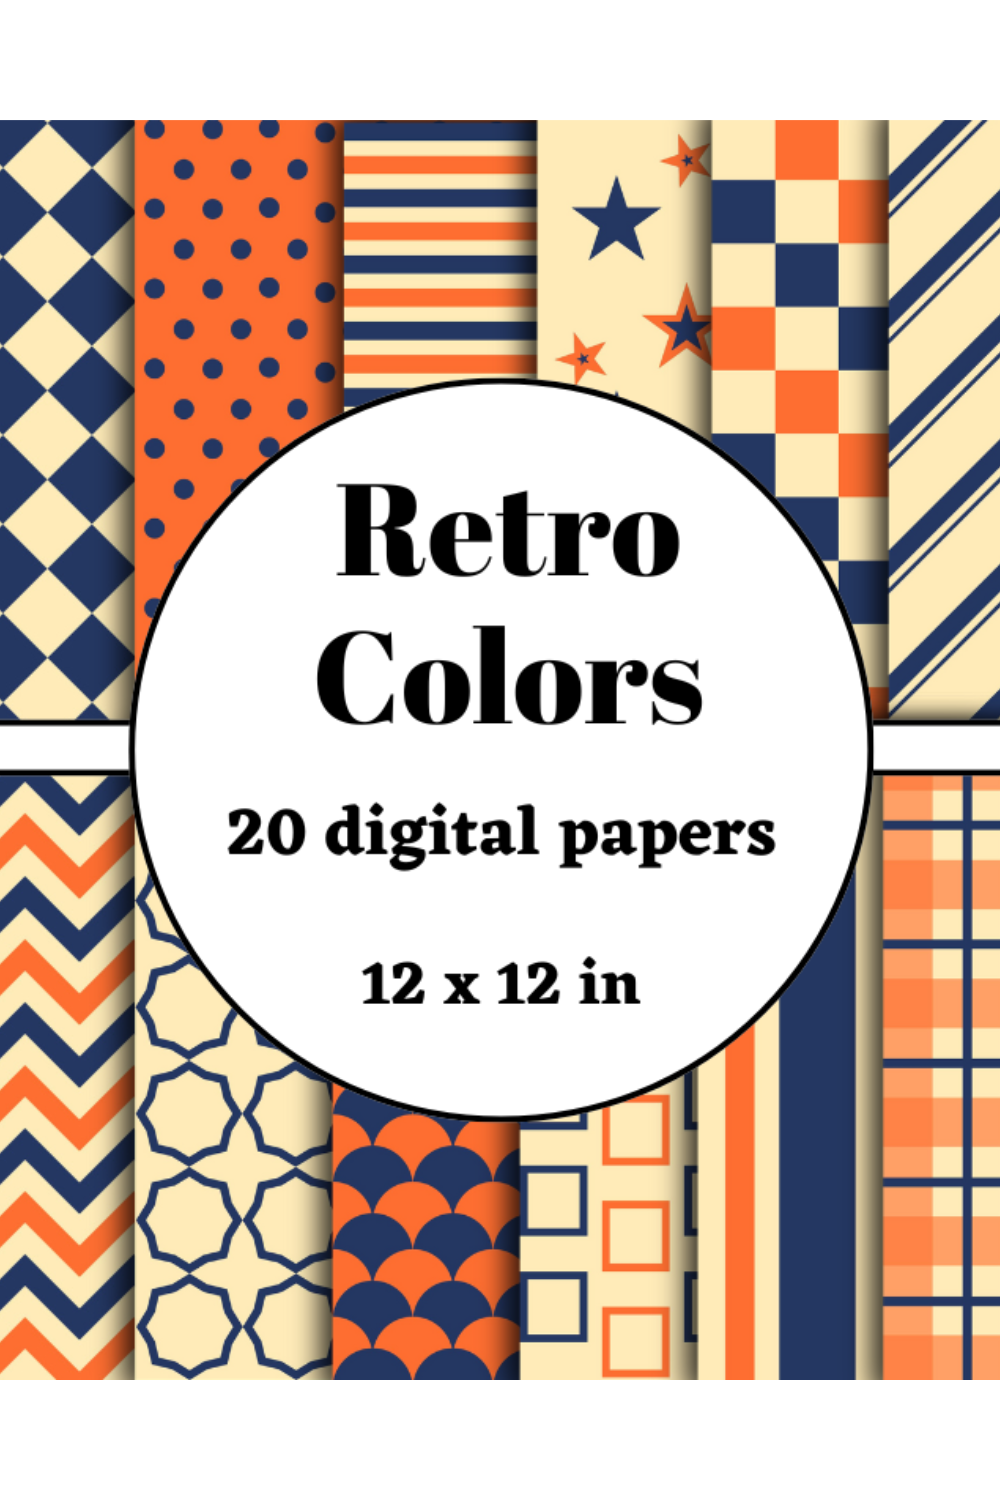 Retro digital papers pinterest preview image.